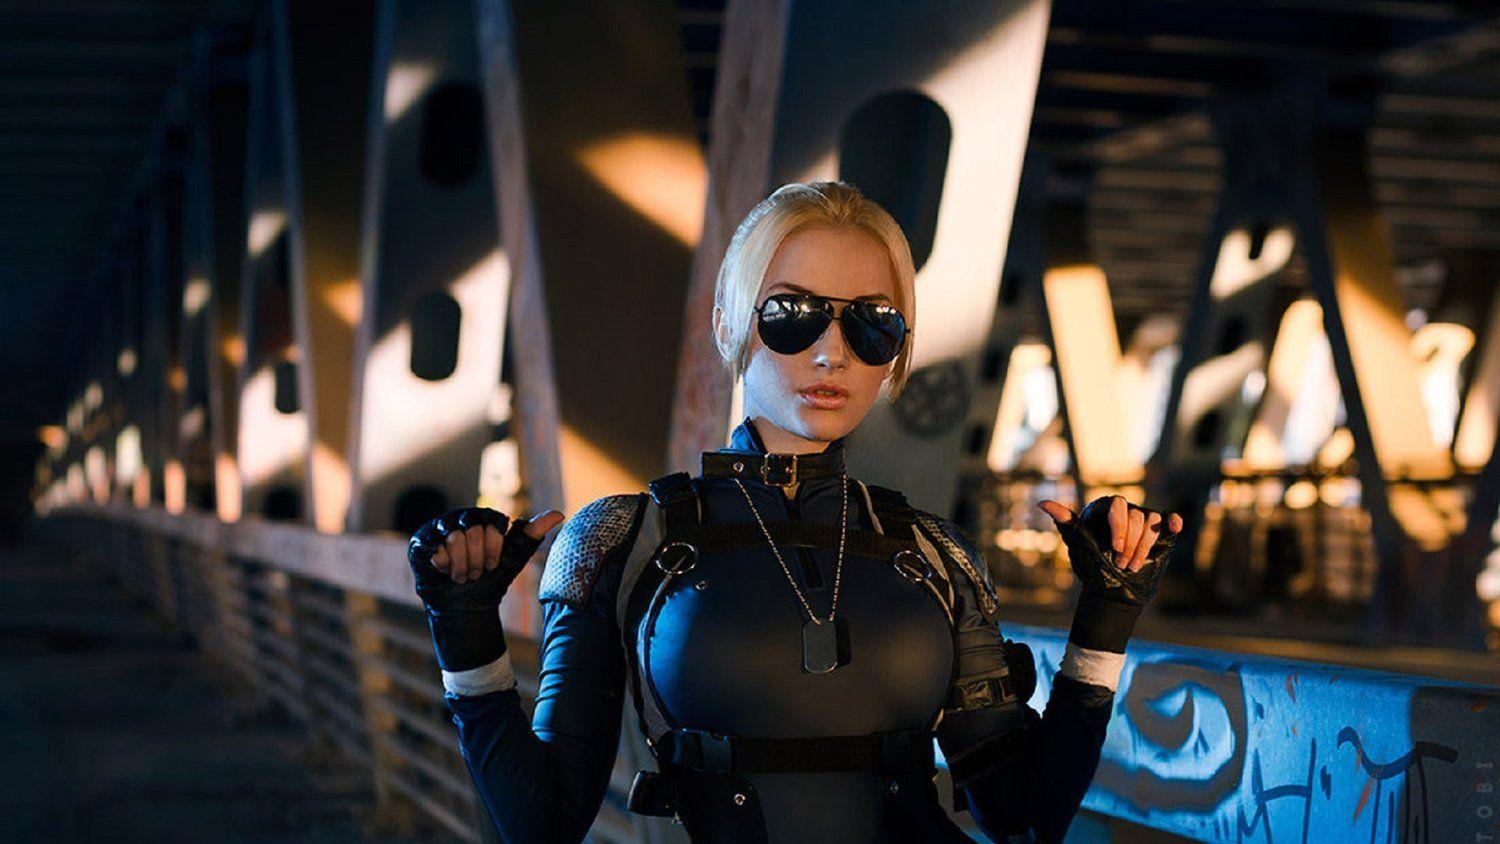 Cassie Cage Is Kicking Ass In This MORTAL KOMBAT X Cosplay